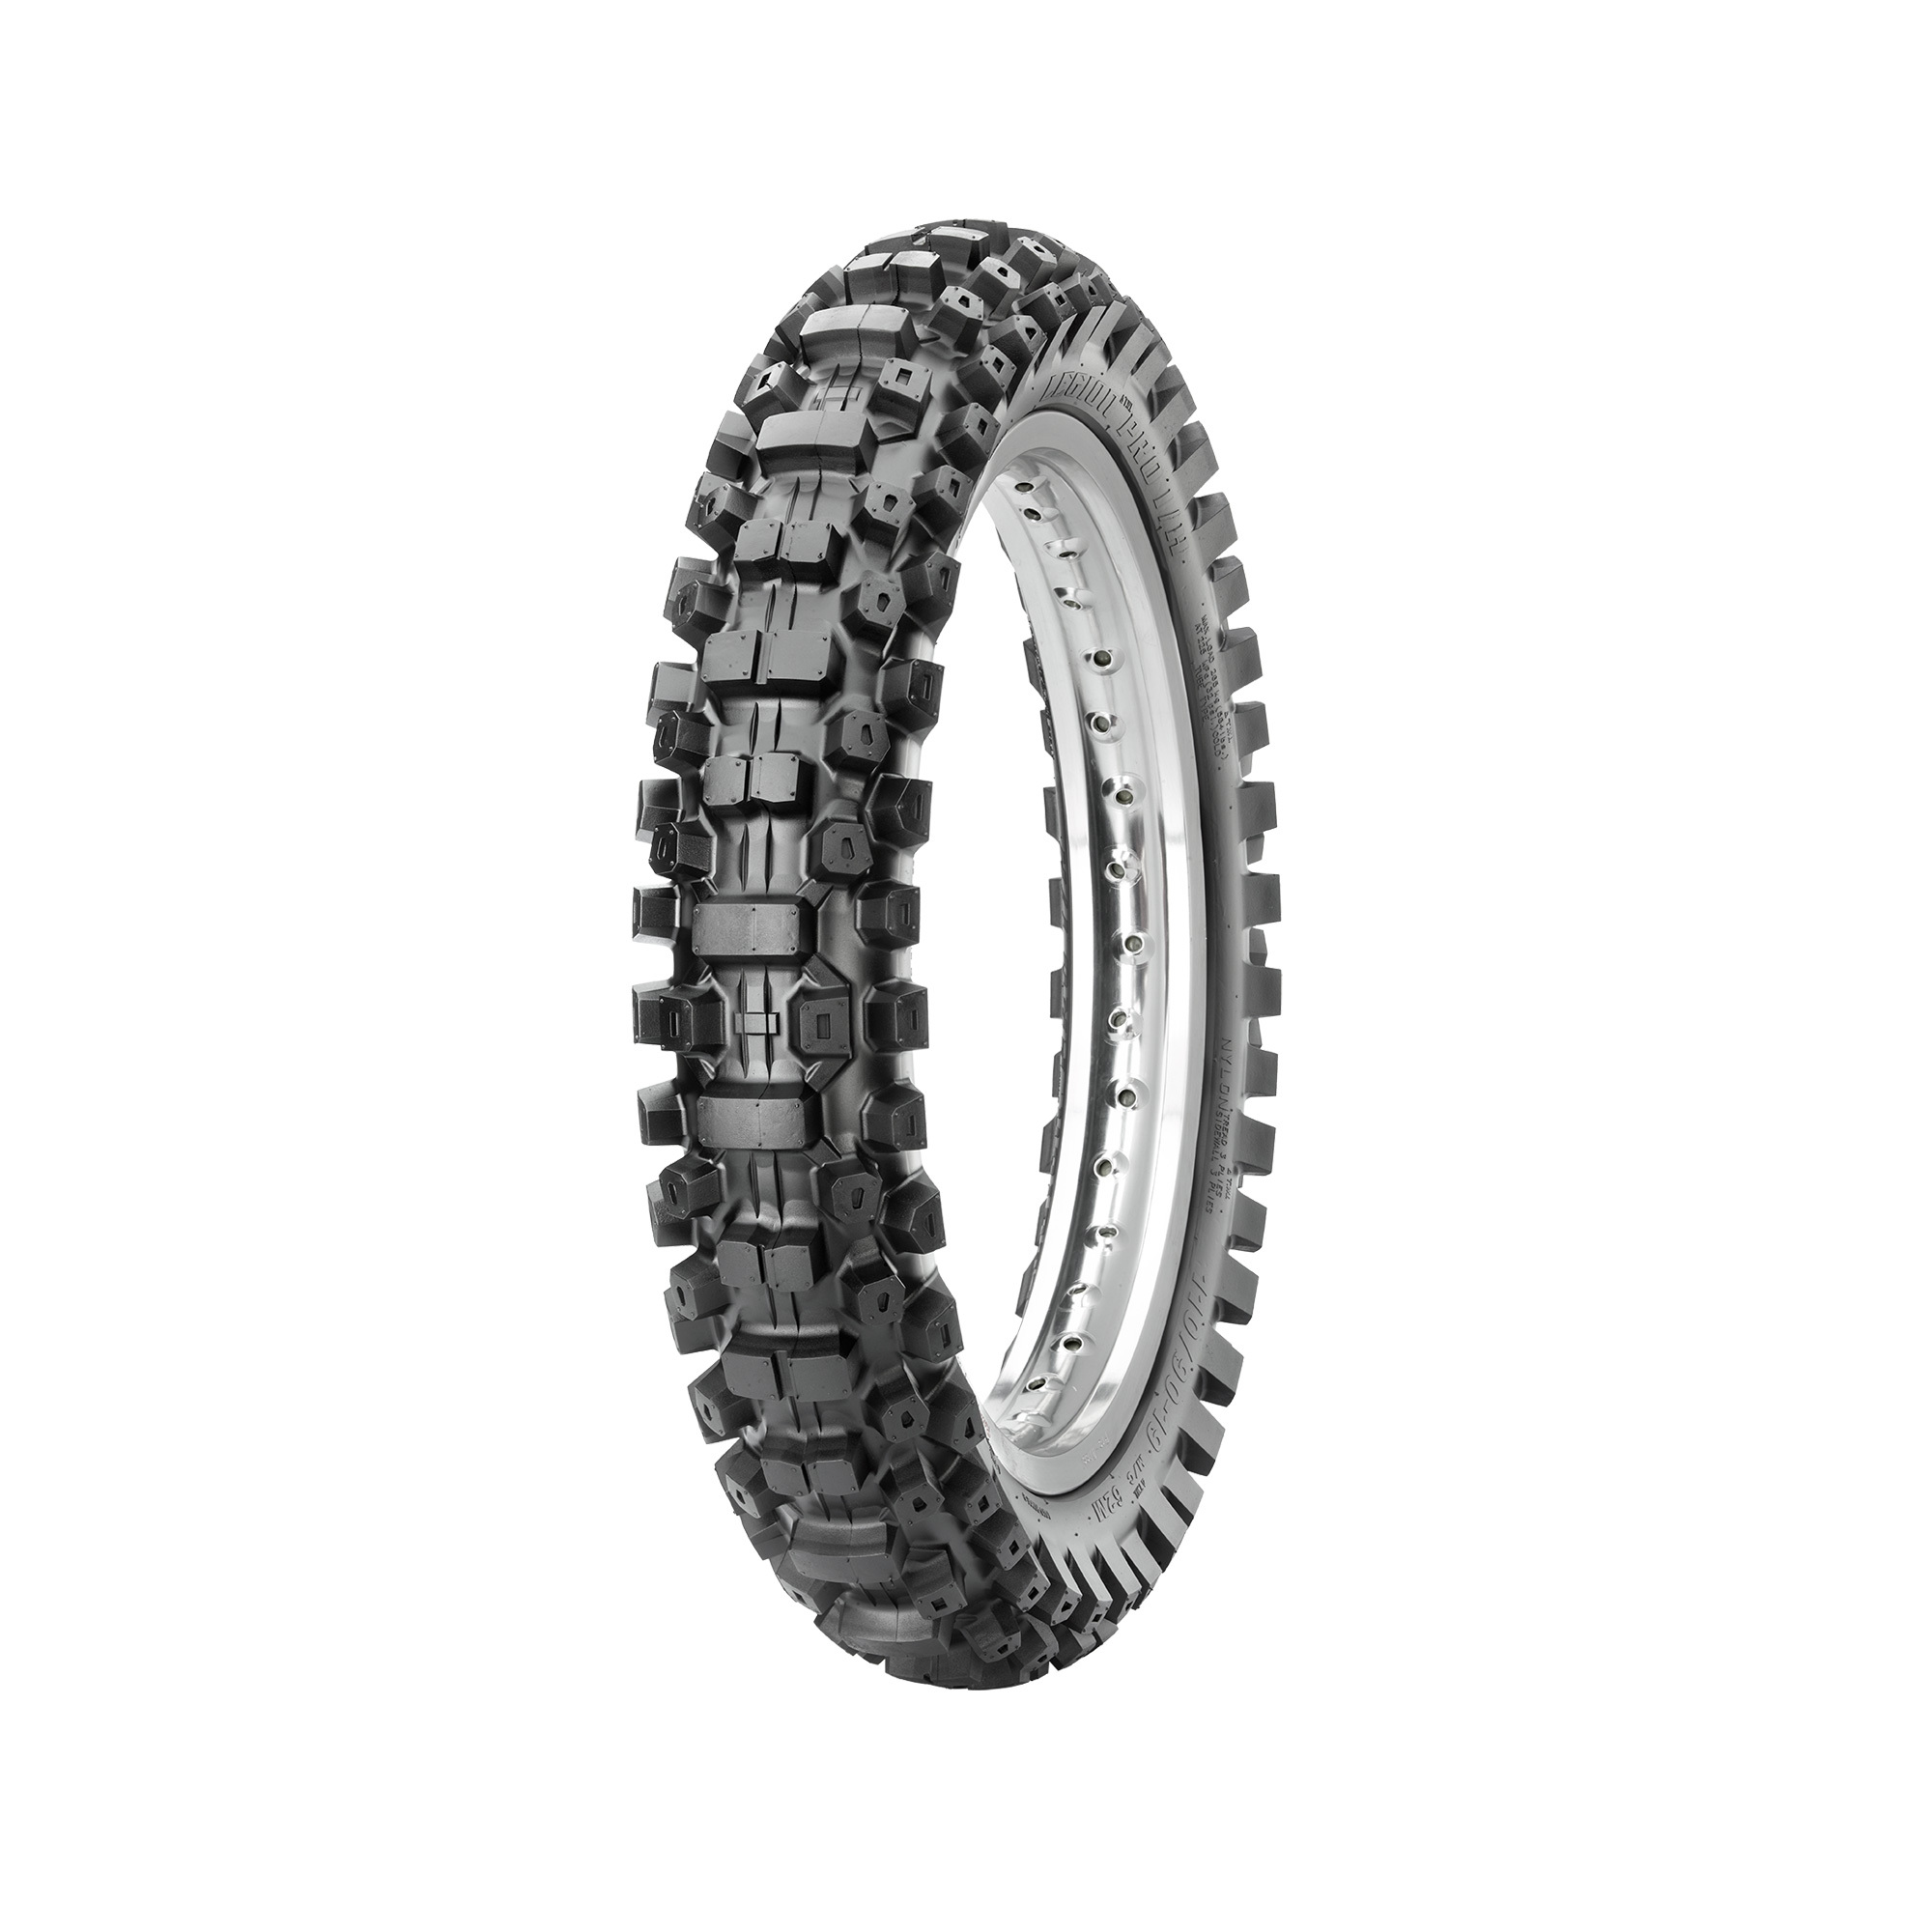 Legion Pro I/H off-road motorcycle tire